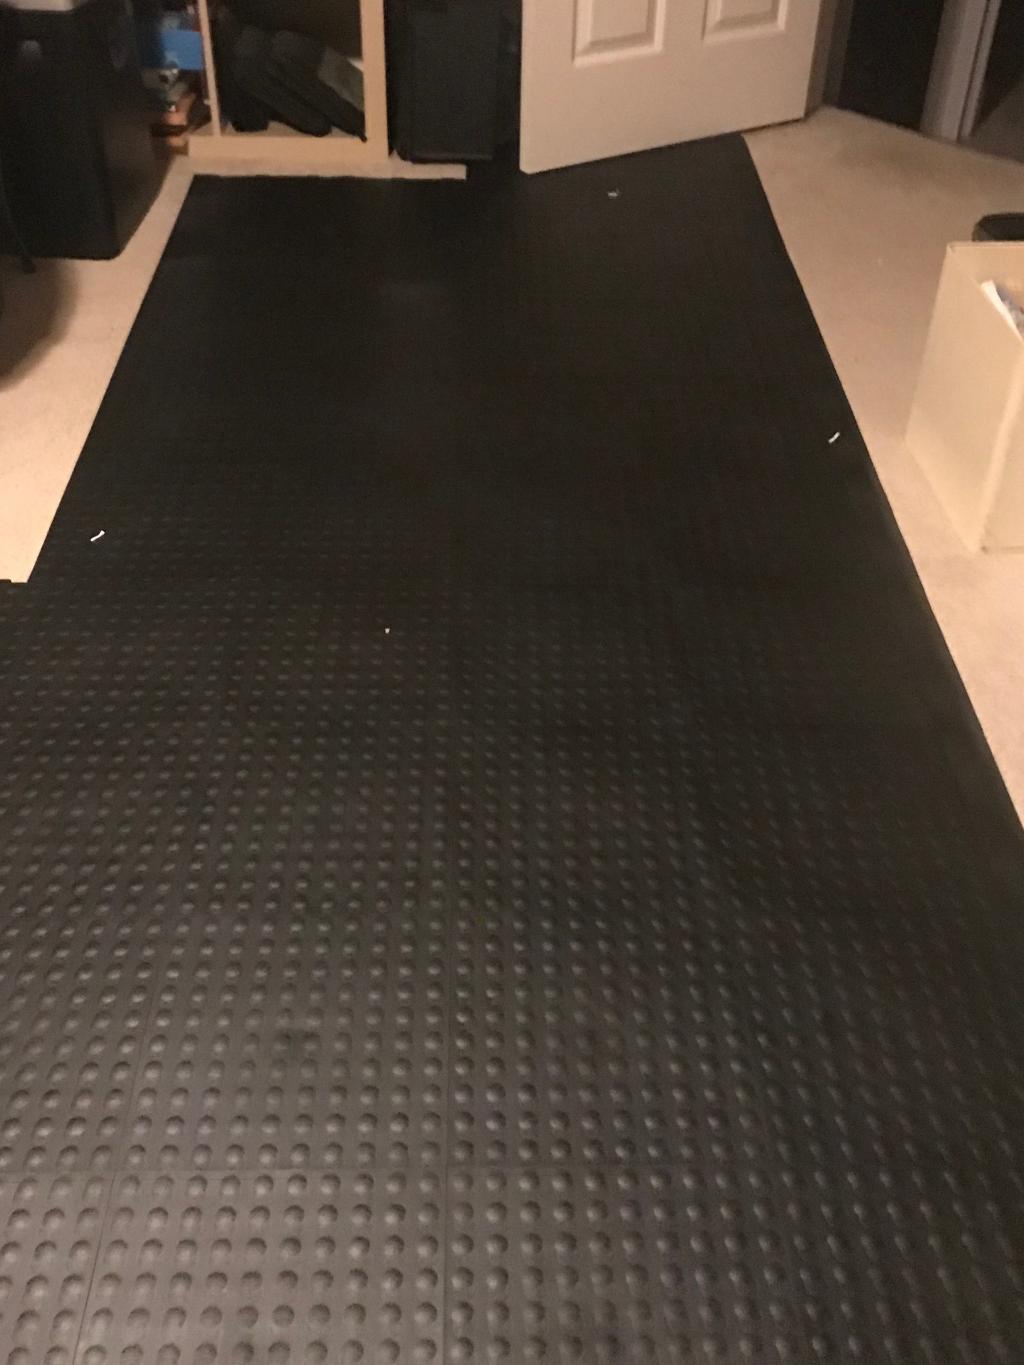 StayLock Tile Bump Top Black 9/16 Inch x 1x1 Ft. customer review photo 3